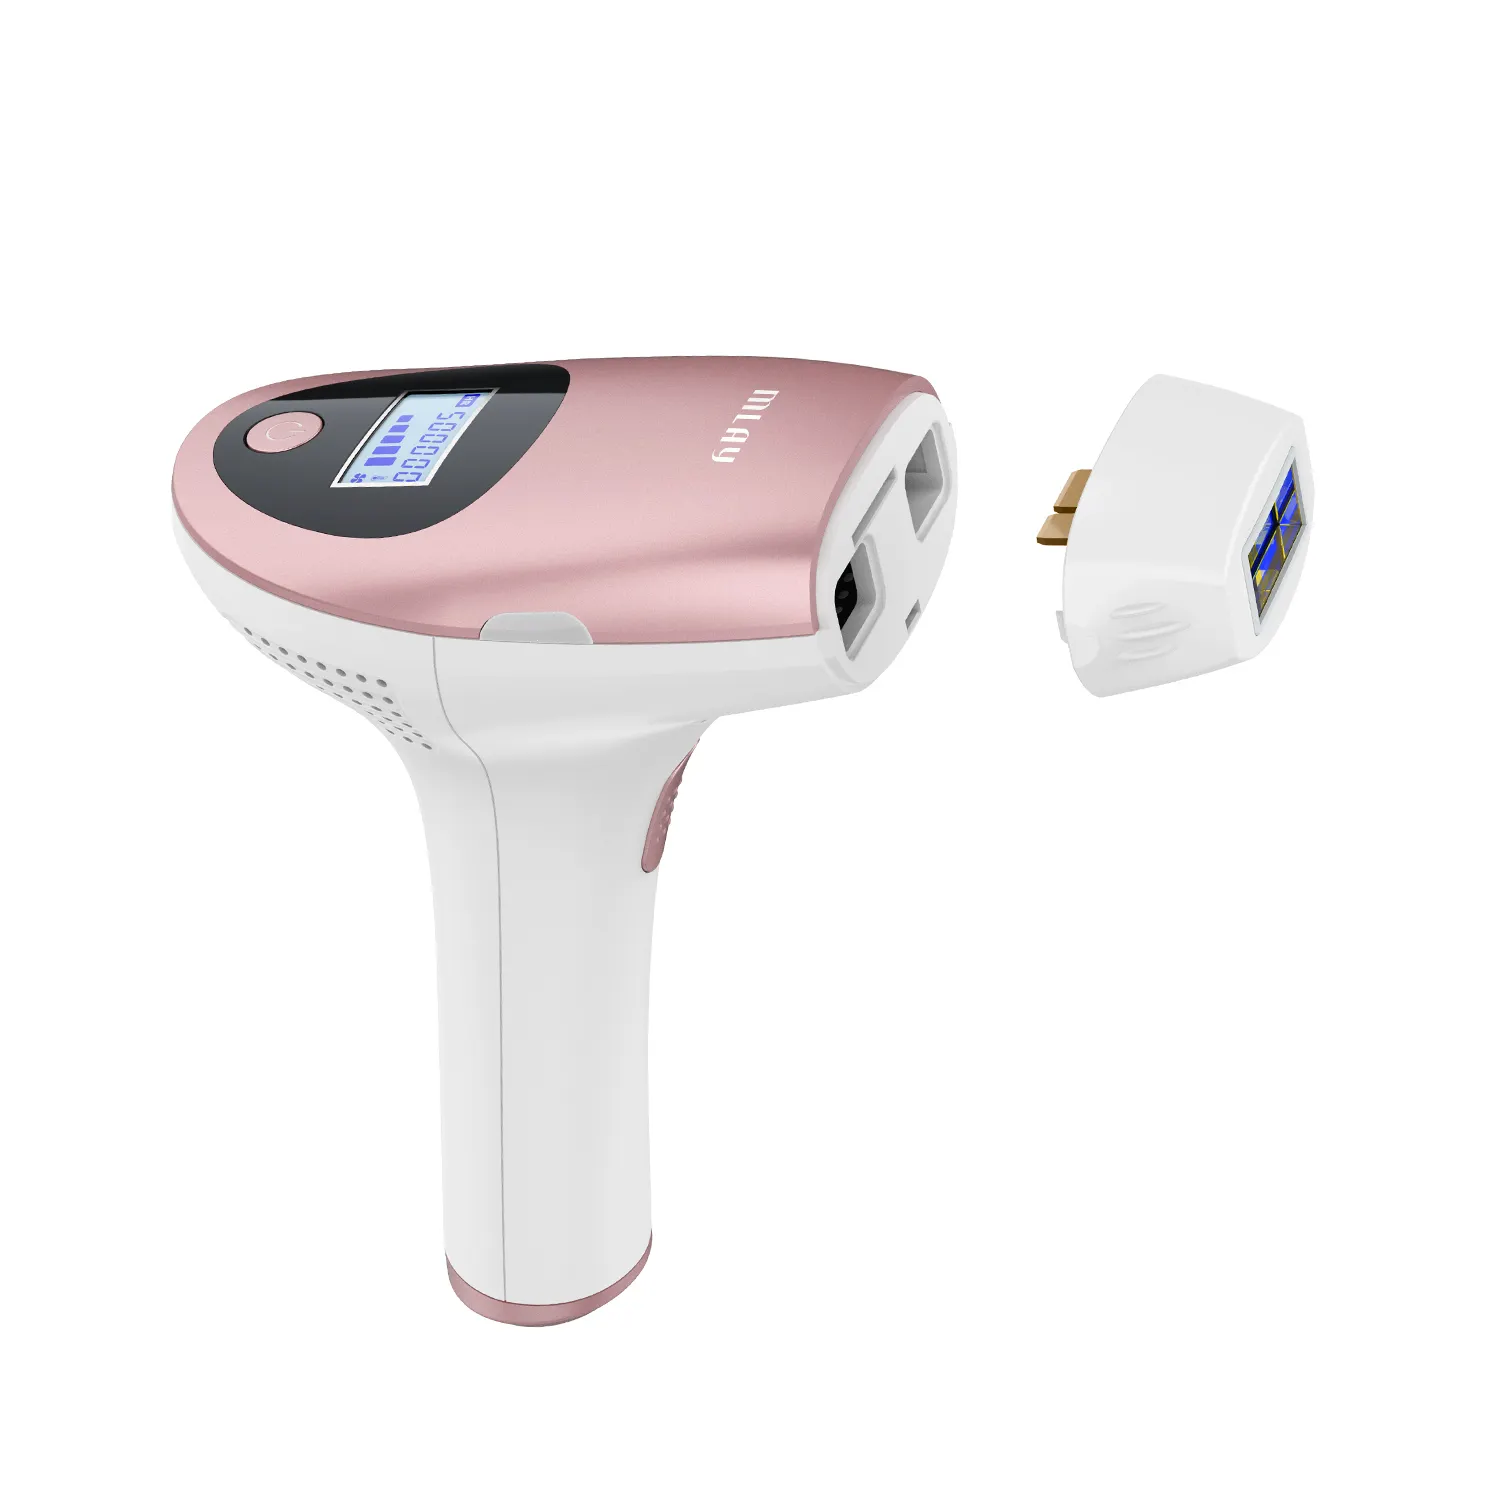 MLAY Ipl Laser Hair Removal Device from Home Use Laser Beauty Equipment 12V Xenon Laser Lamp for Ipl Hair Removal Machine Cerr